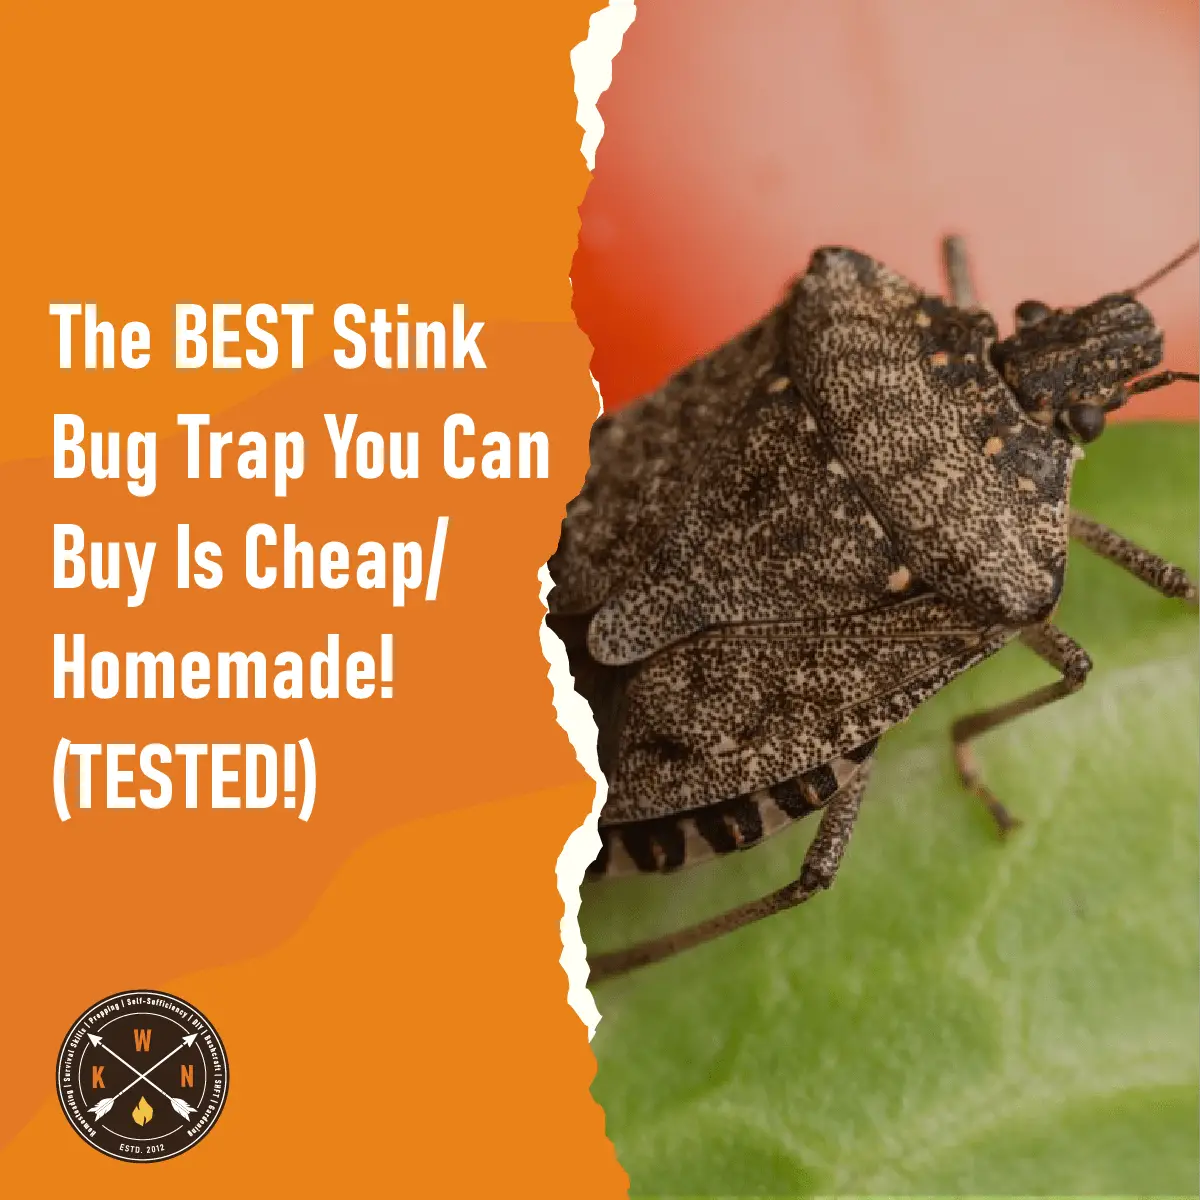 https://knowledgeweighsnothing.com/wp-content/uploads/2016/12/The-BEST-Stink-Bug-Trap-You-Can-Buy-Is-Cheap-Homemade-TESTED-for-facebook.png